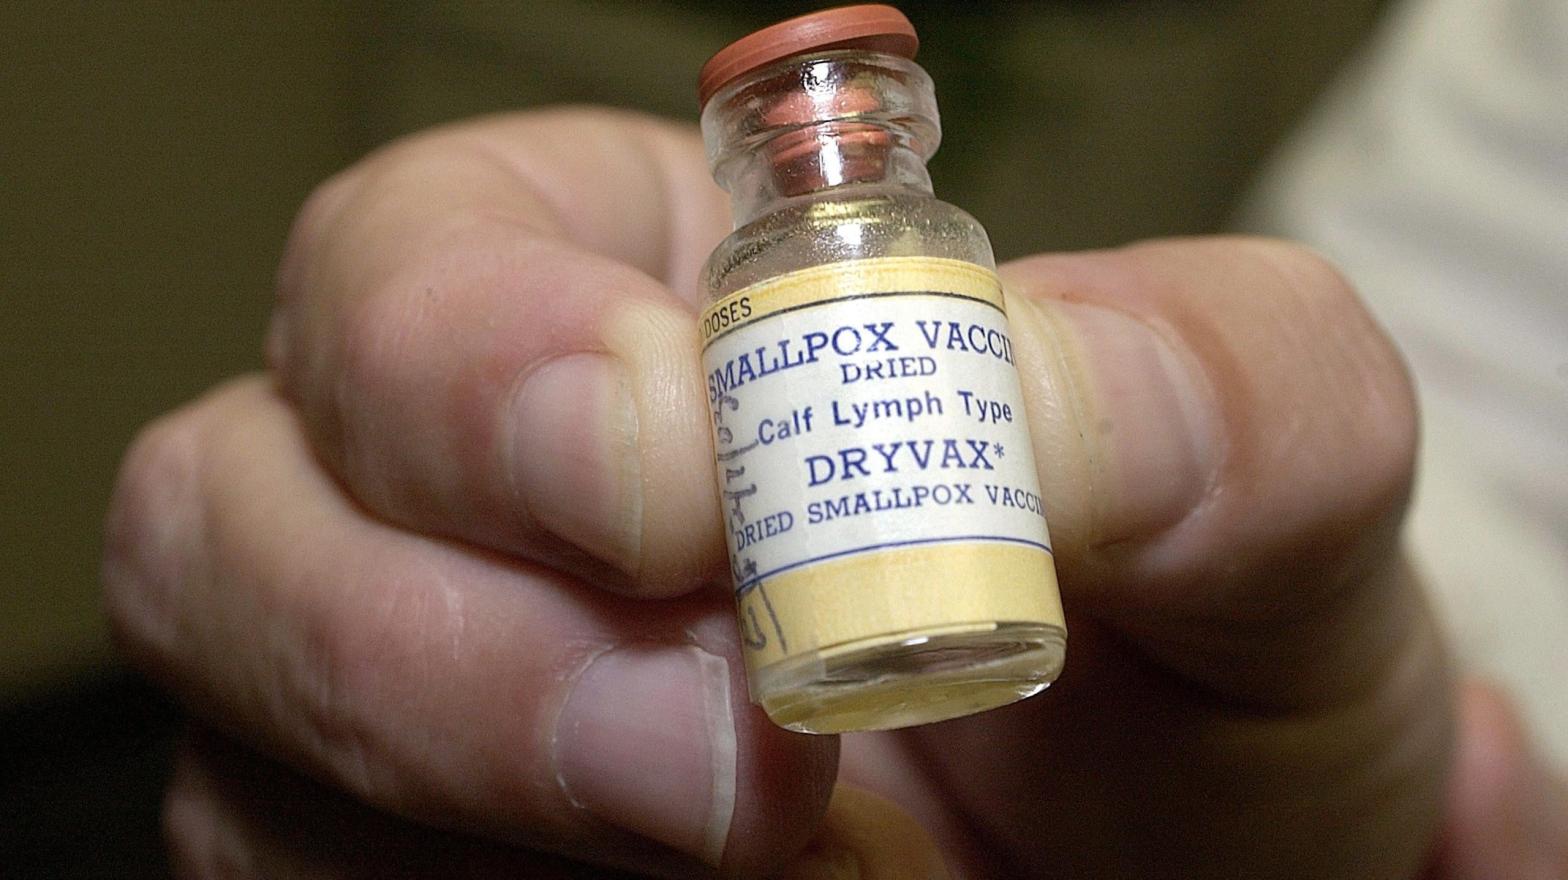 A vial of dried smallpox vaccination is shown December 5, 2002 in Altamonte Springs, Florida. (Image: Scott A. Miller, Getty Images)